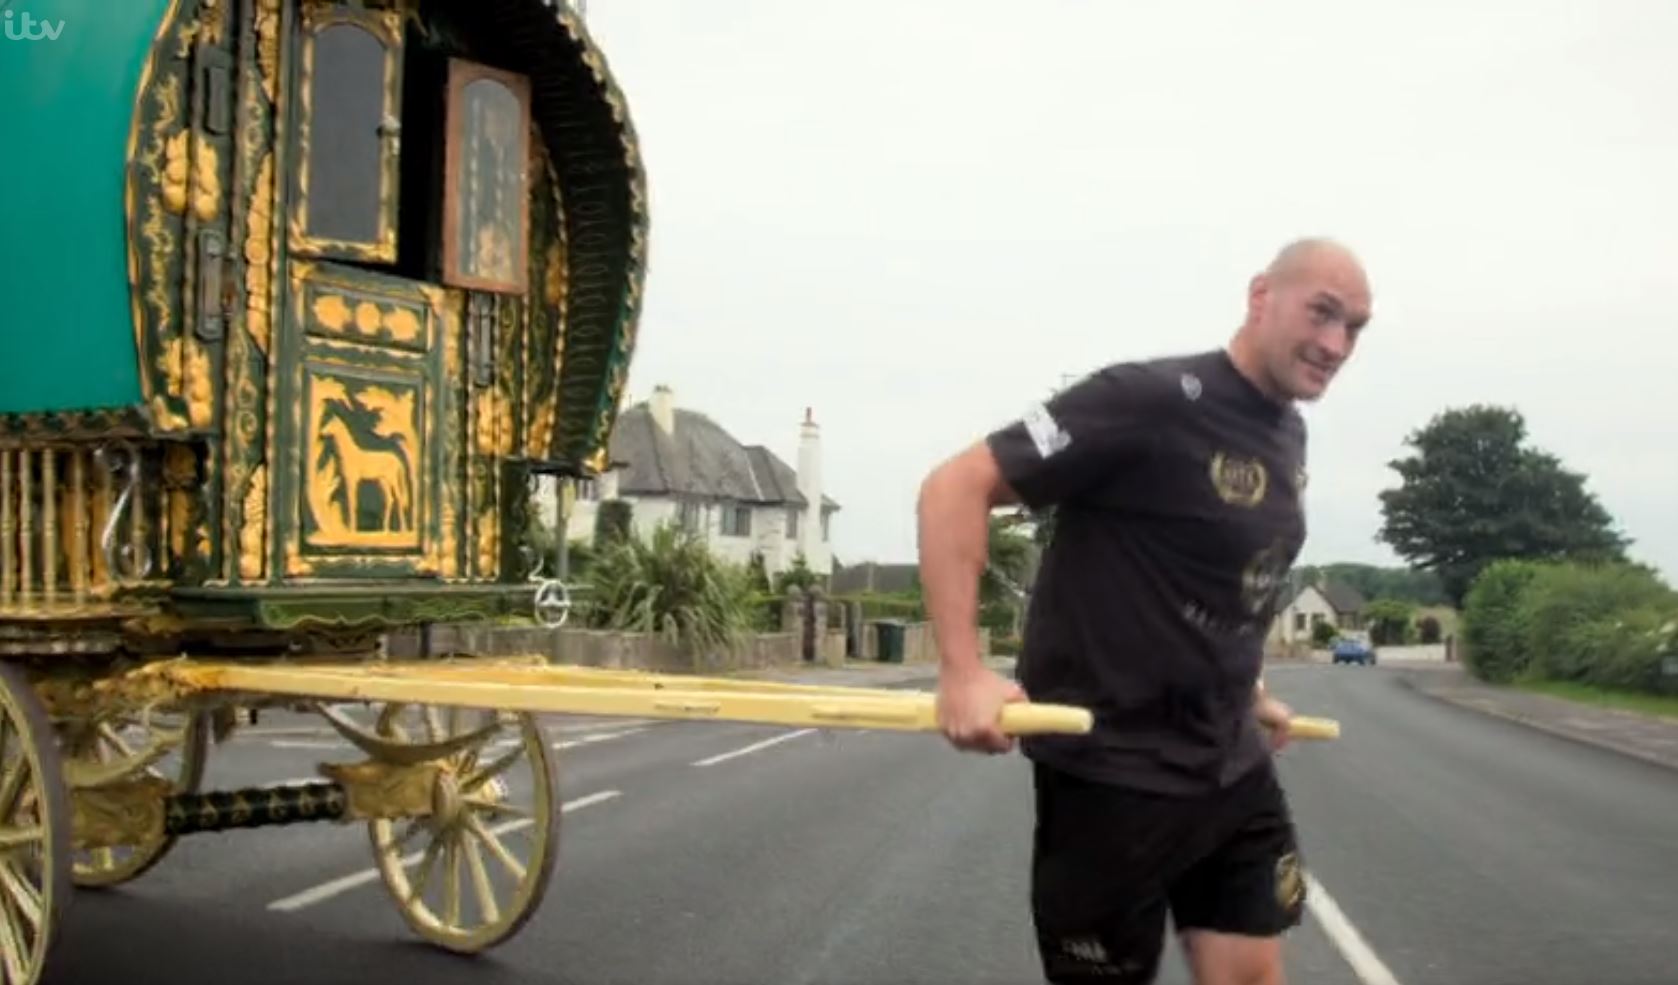 The Gypsy King decides to take the wagon out for a spin in a funny clip from last year's ITV documentary